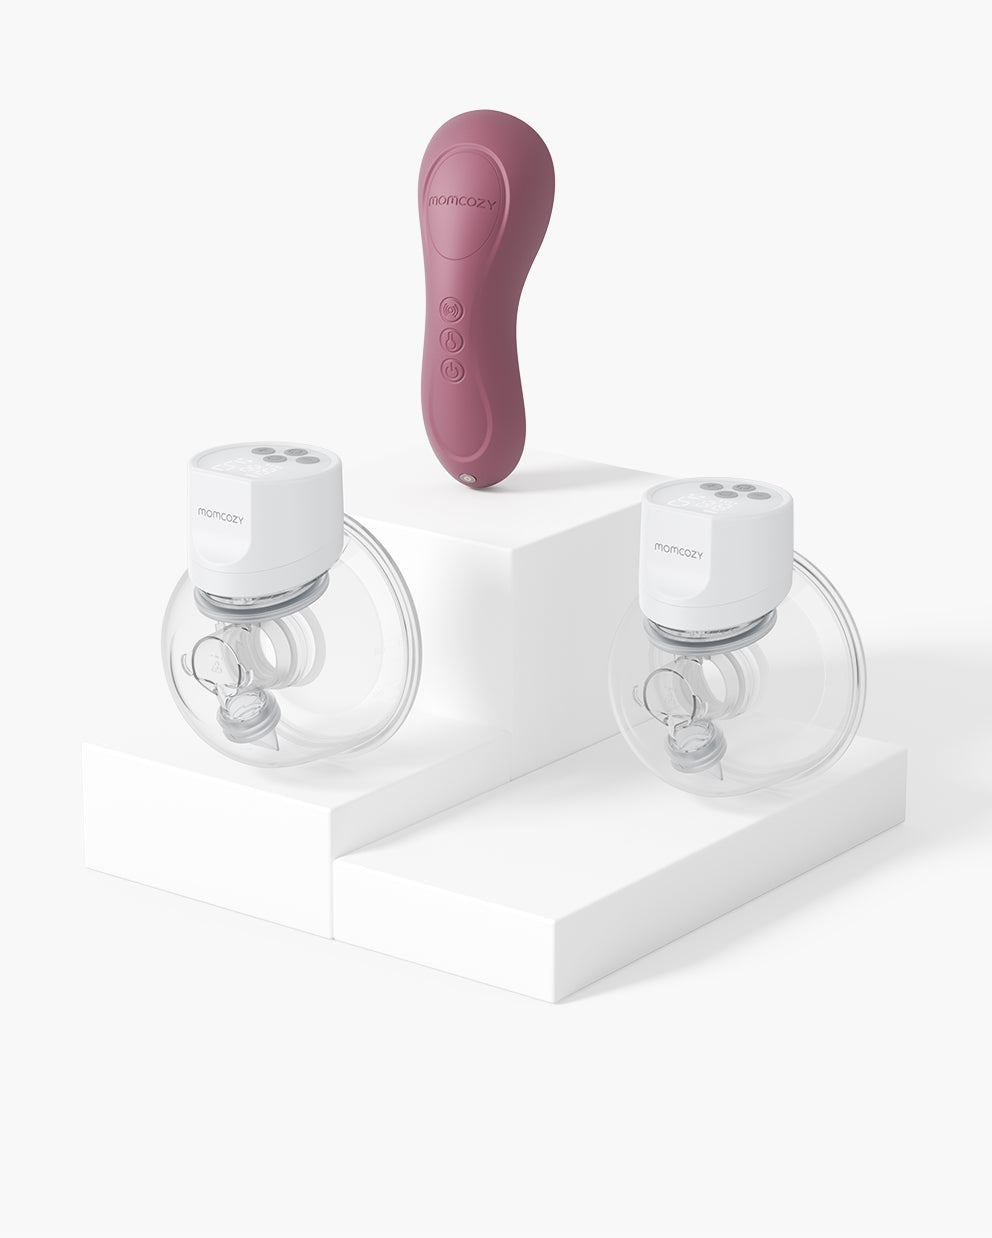 How to Use Momcozy Lactation Massager? 